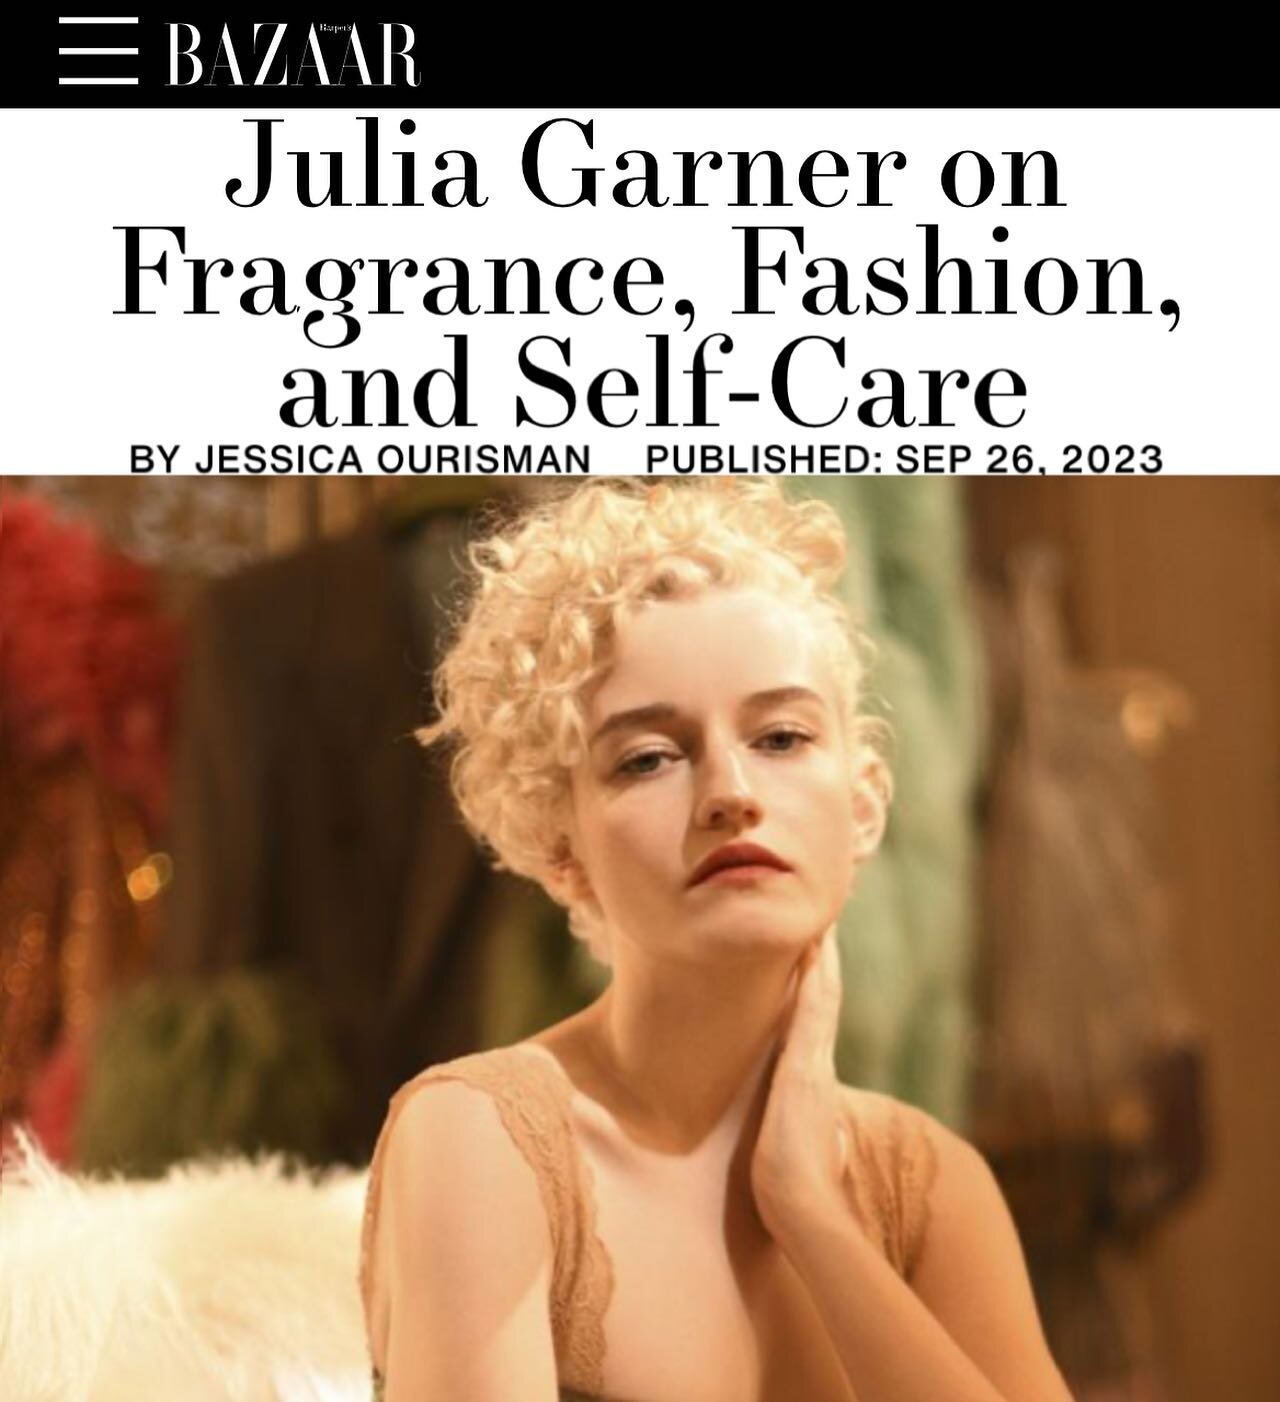 Actor @juliagarnerofficial is one of the faces of the @guccibeauty Guilty Elixir campaign.  She was beyond lovely and has &bull;excellent&bull; taste in facialists&hellip; (yes, @lordgmv, I am talking about you!)
.
Something about her talent makes he